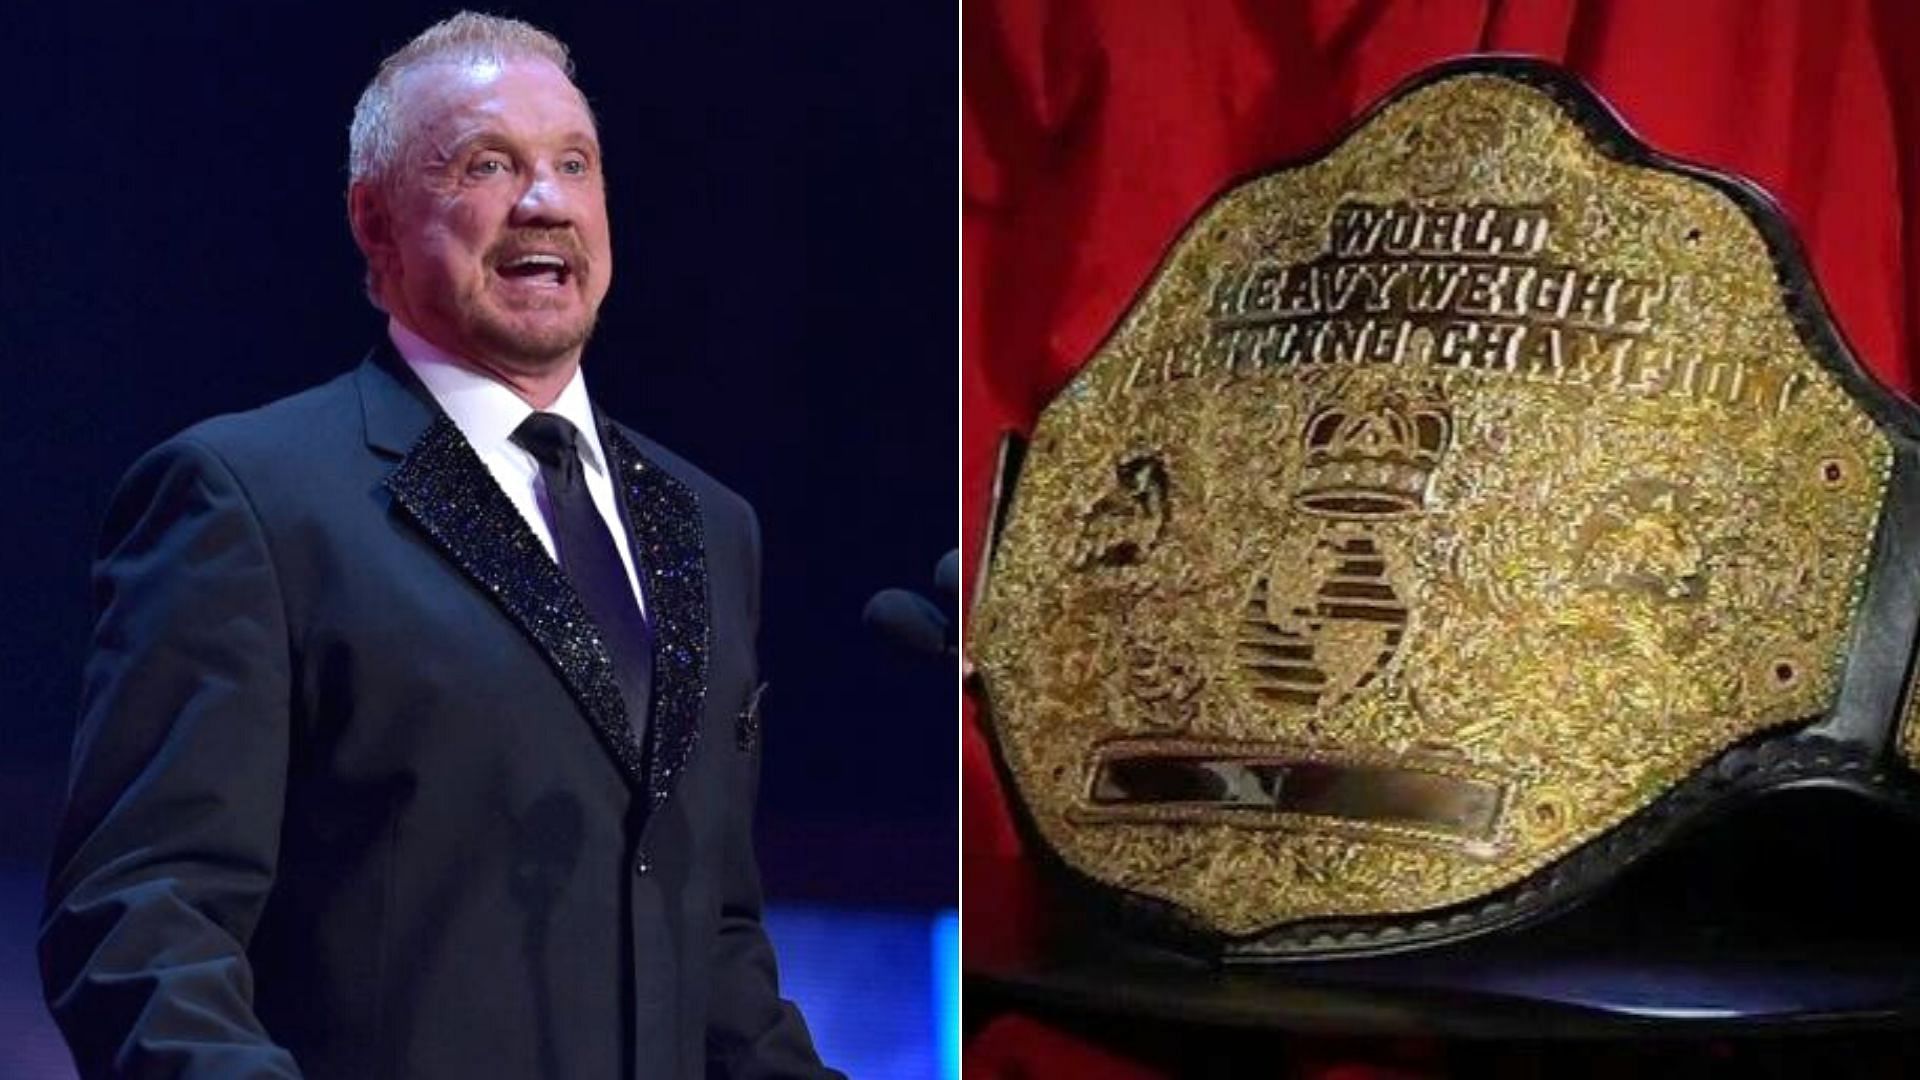 DDP feels Vader deserves to be in the WWE Hall of Fame.